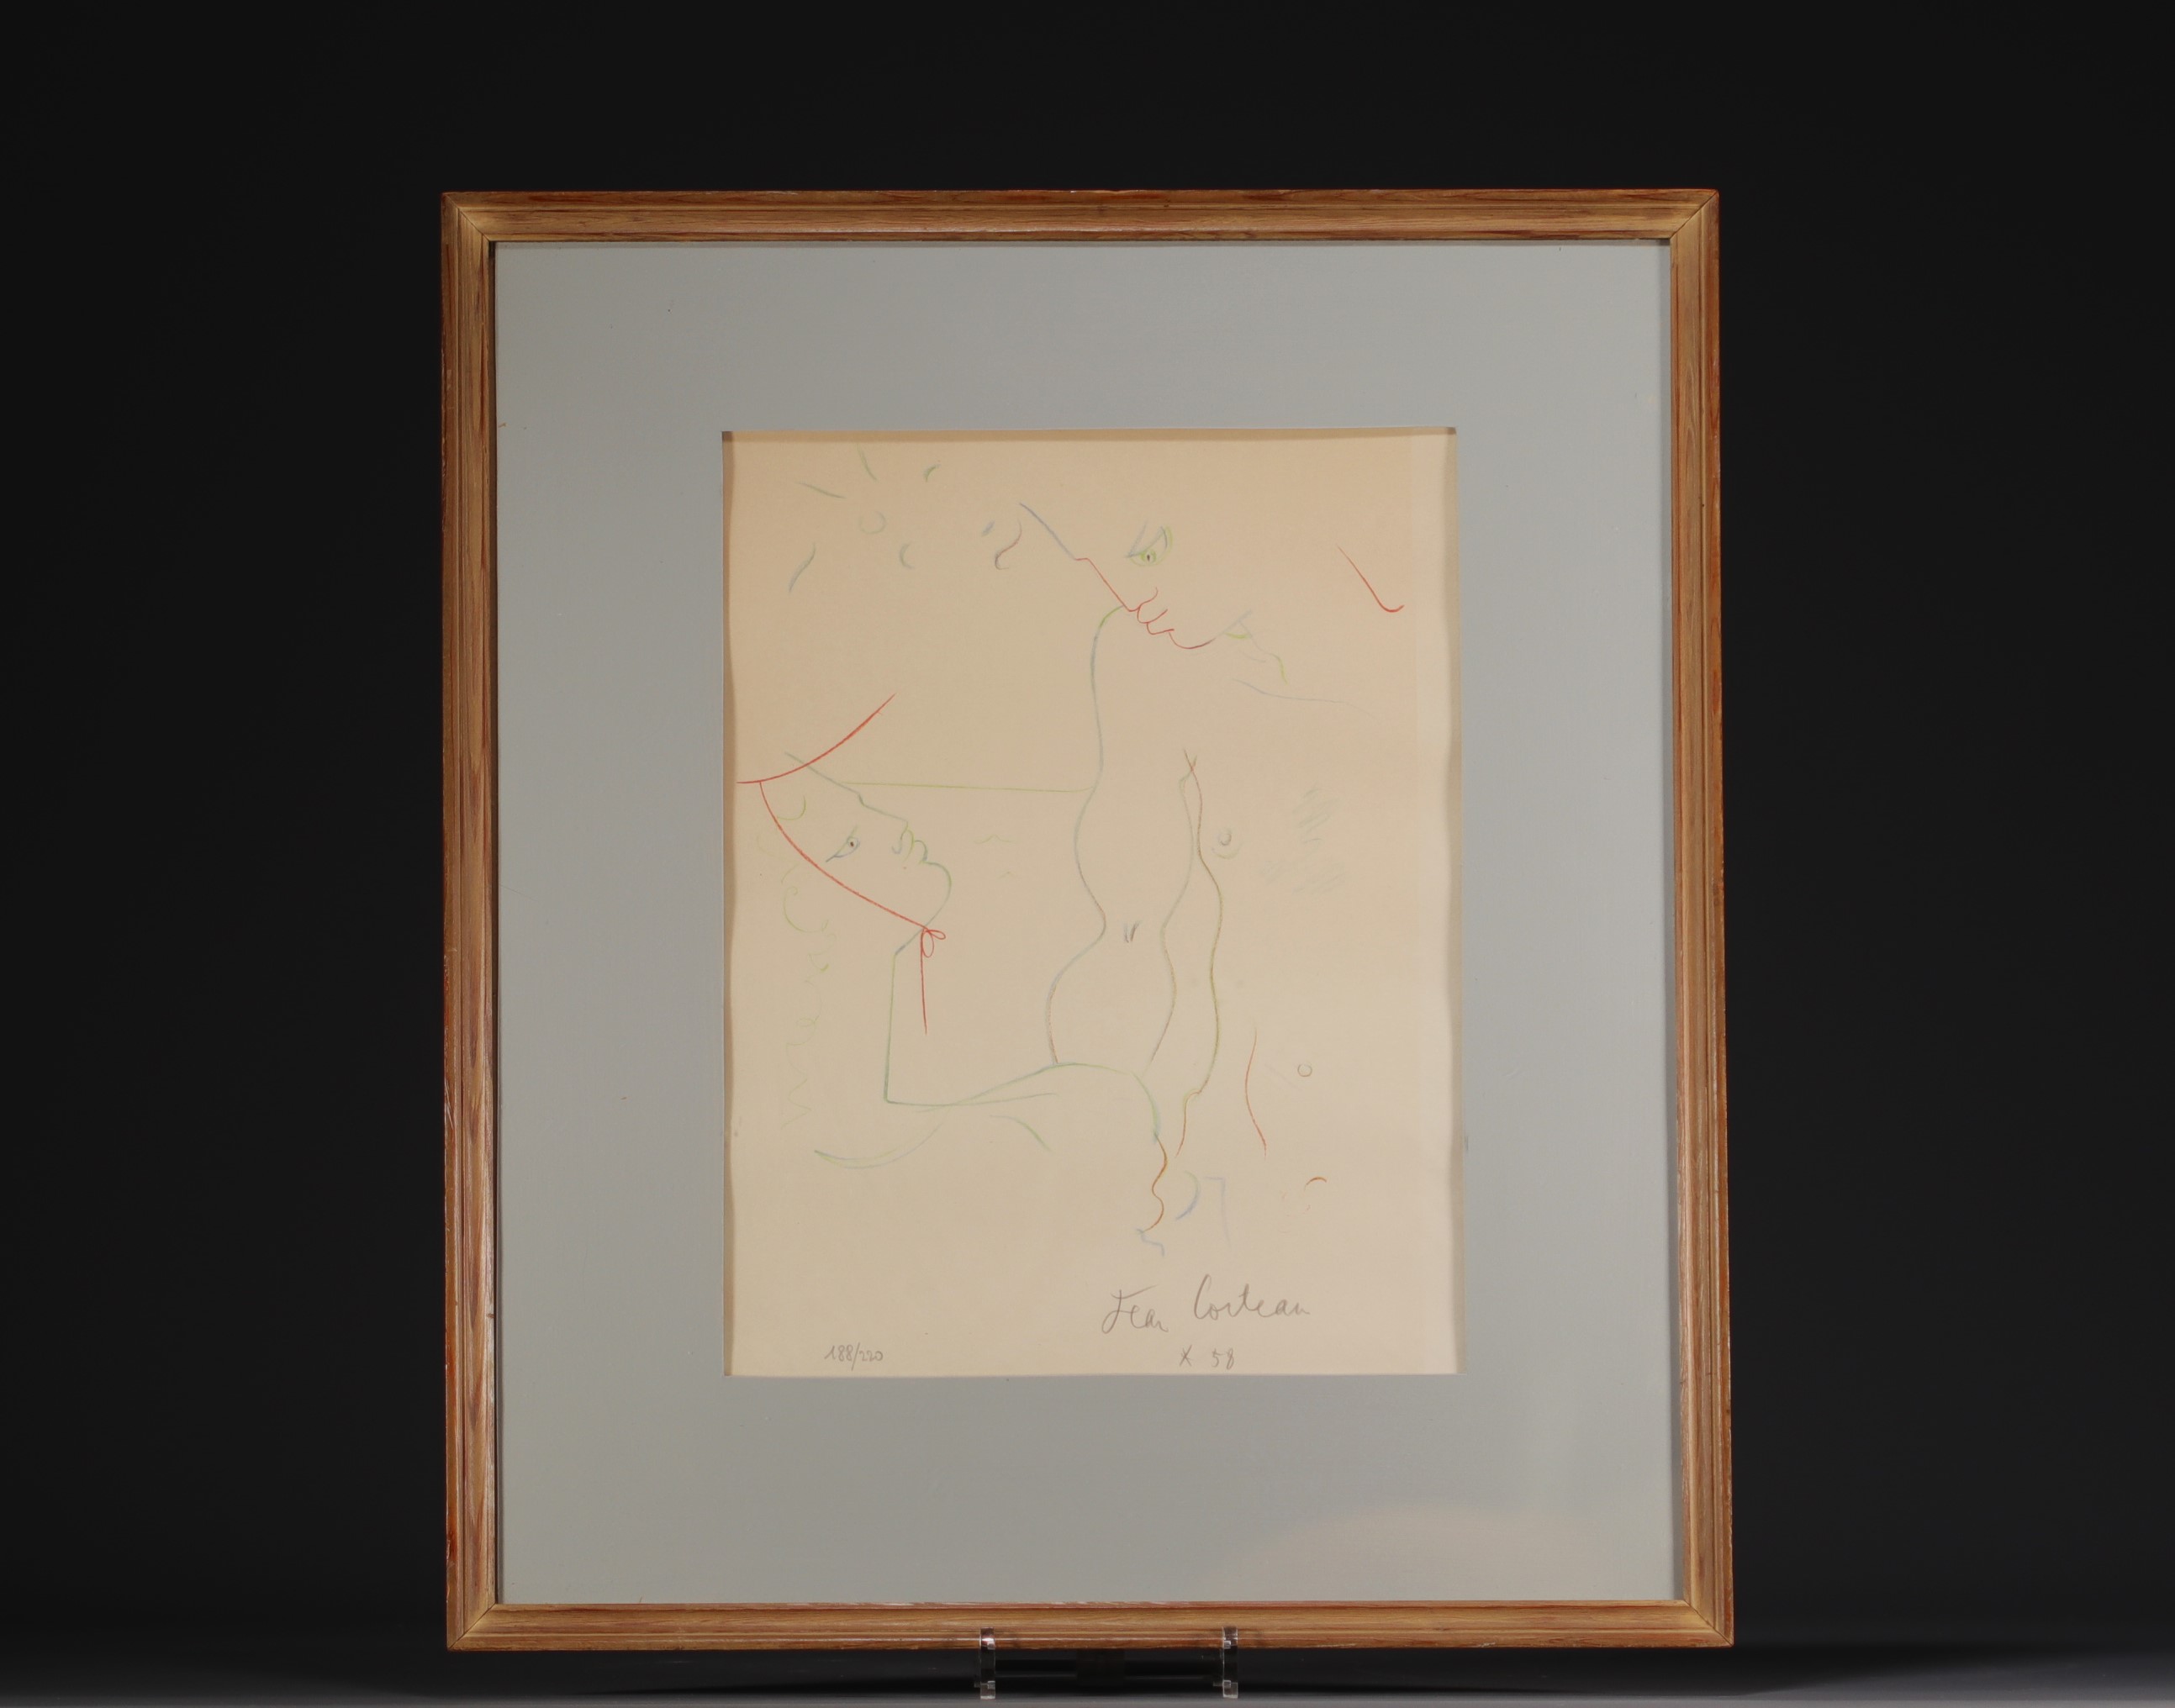 Jean COCTEAU (1889-1963) "Couple" Lithograph numbered 188/220. - Image 2 of 2